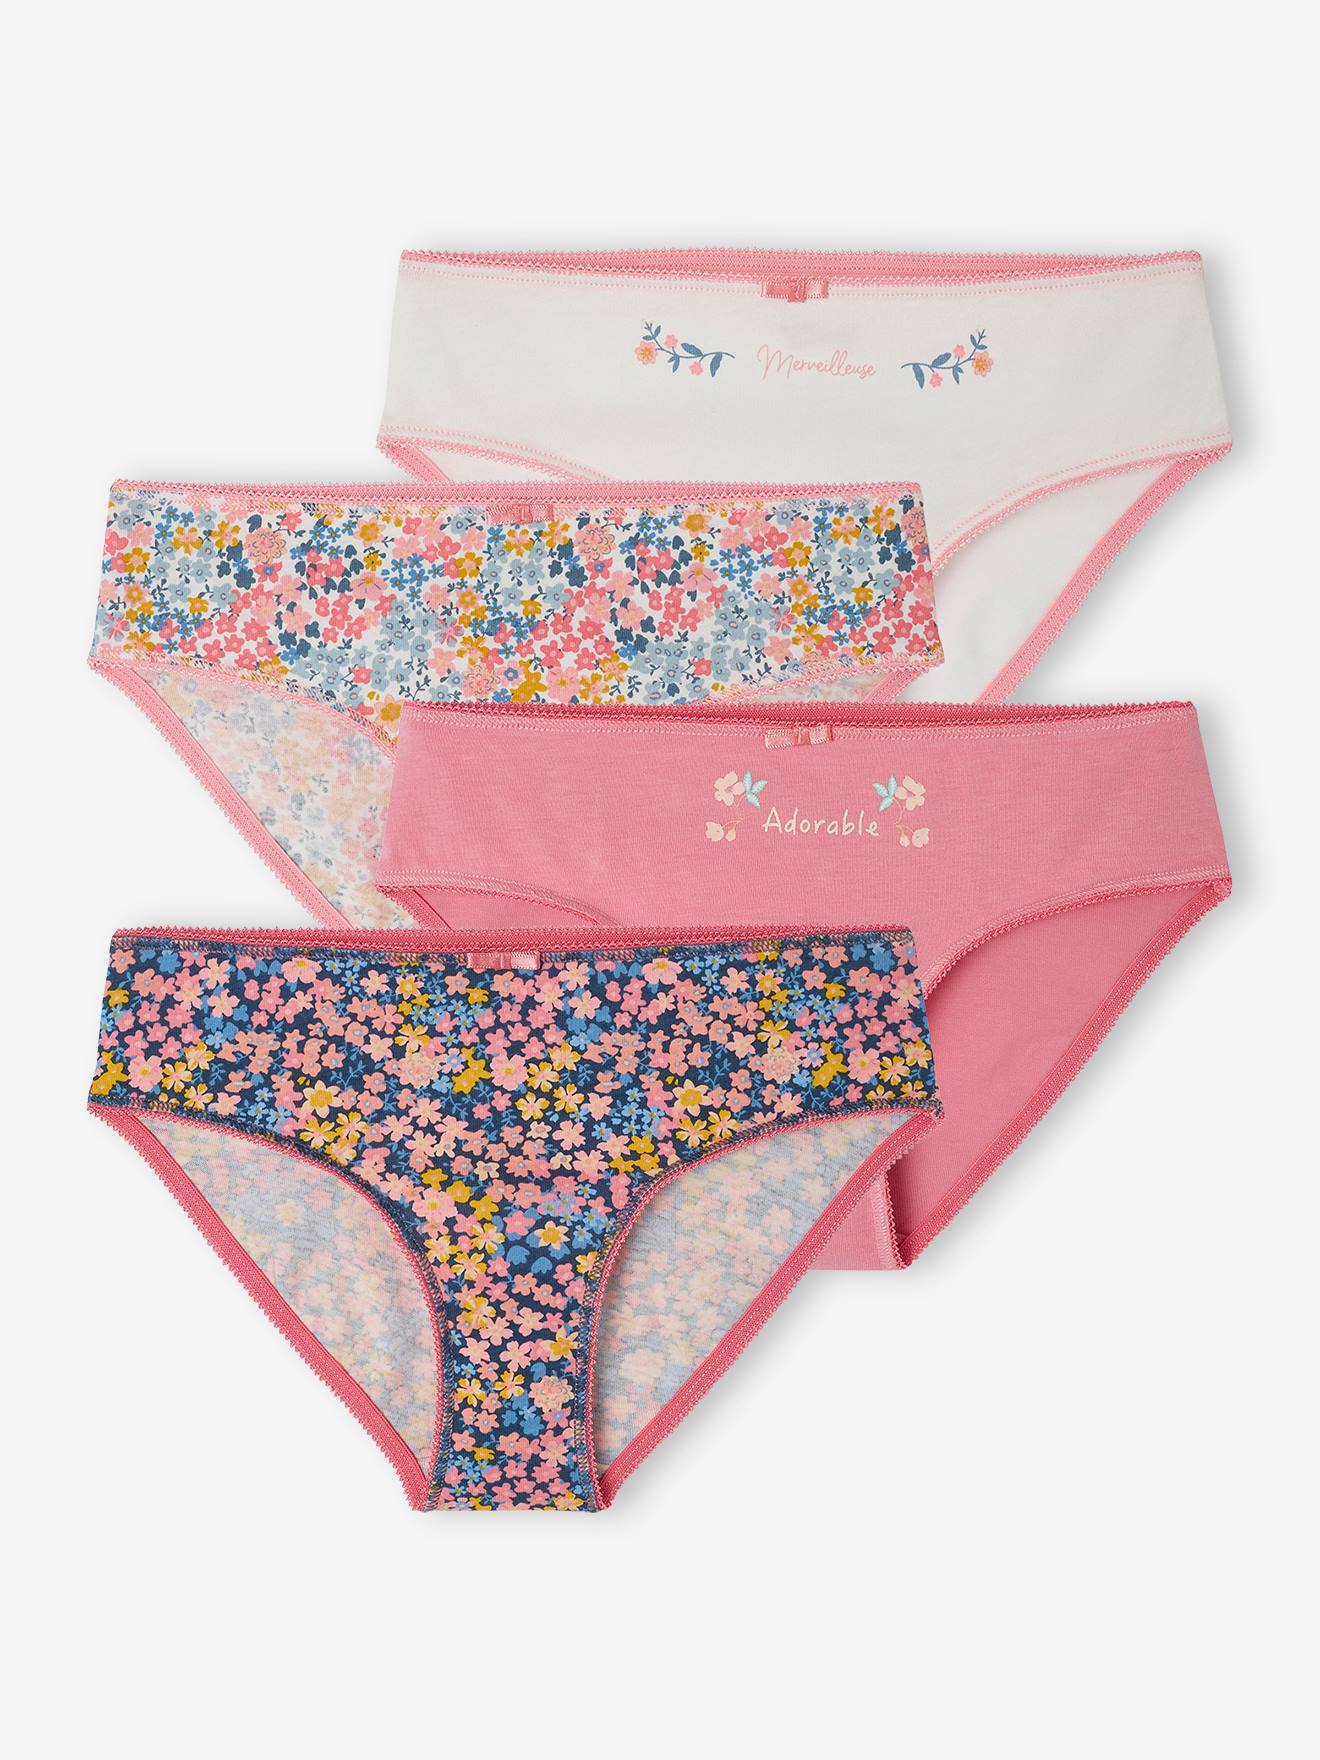 Pack of 4 Magnolia Briefs in Organic Cotton, for Girls - peony